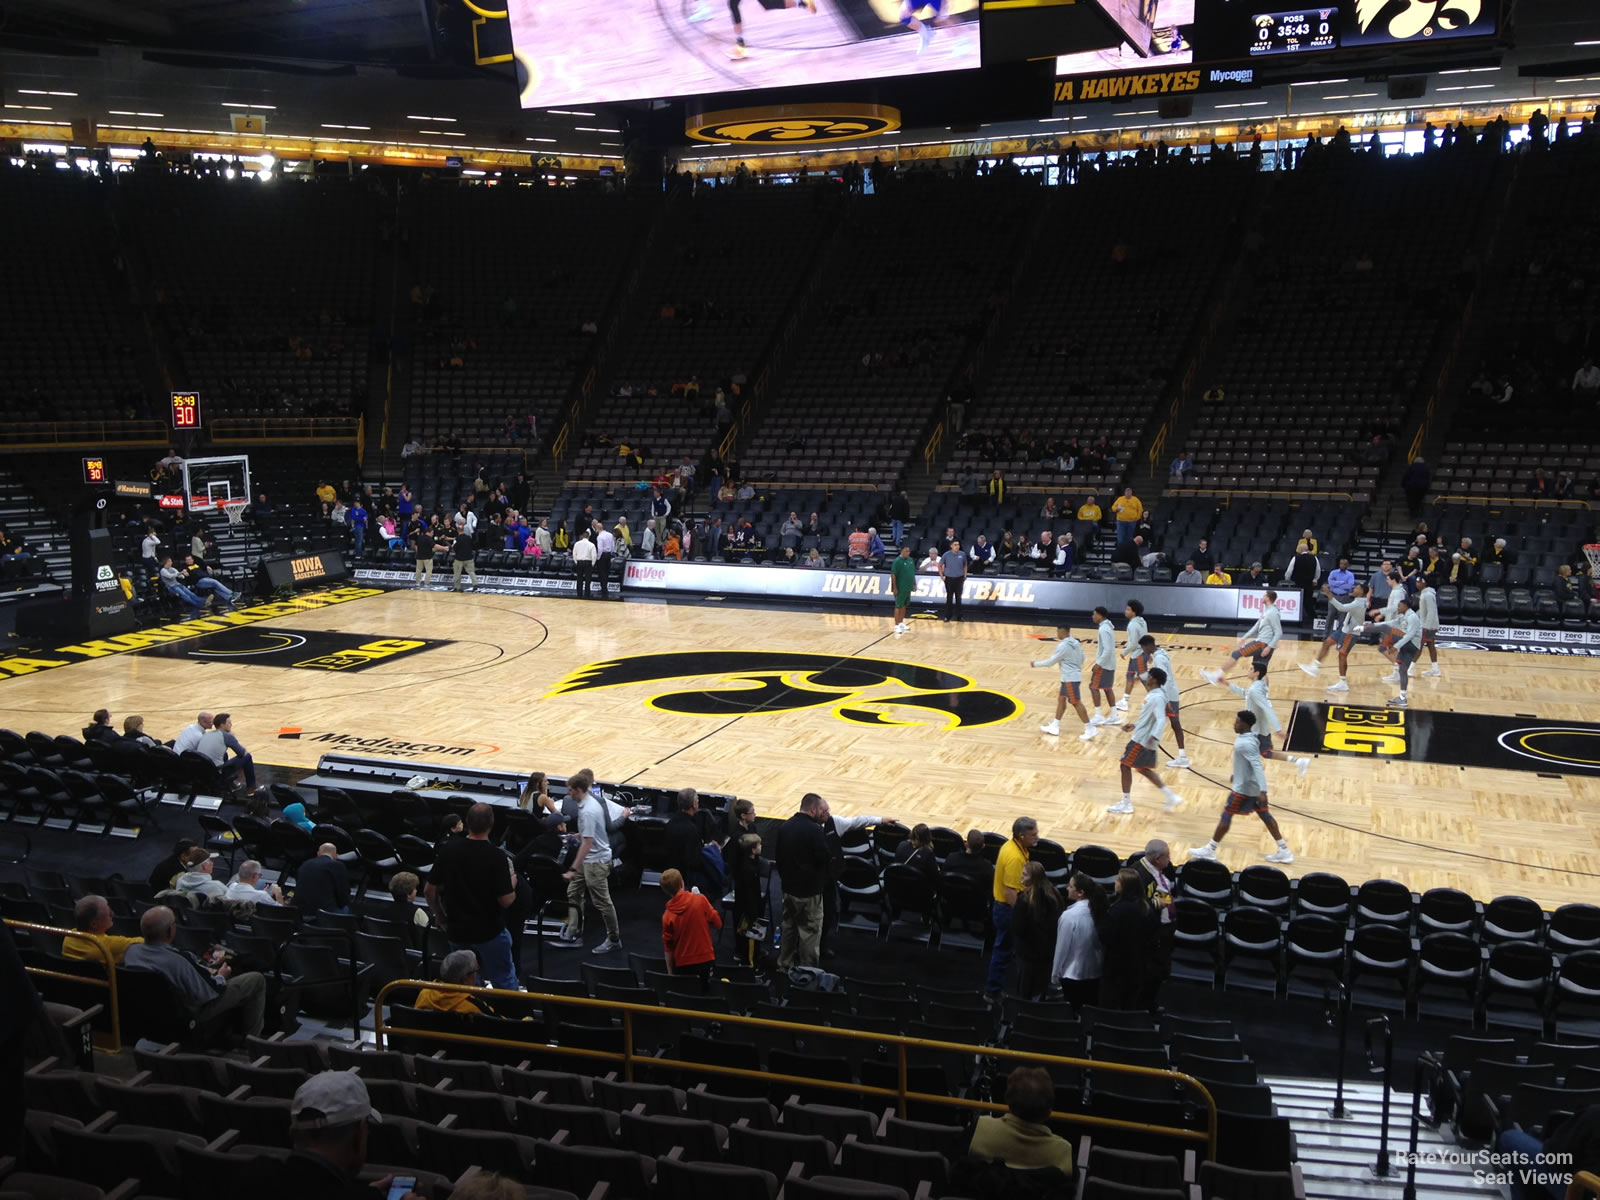 section mm, row 15 seat view  - carver-hawkeye arena